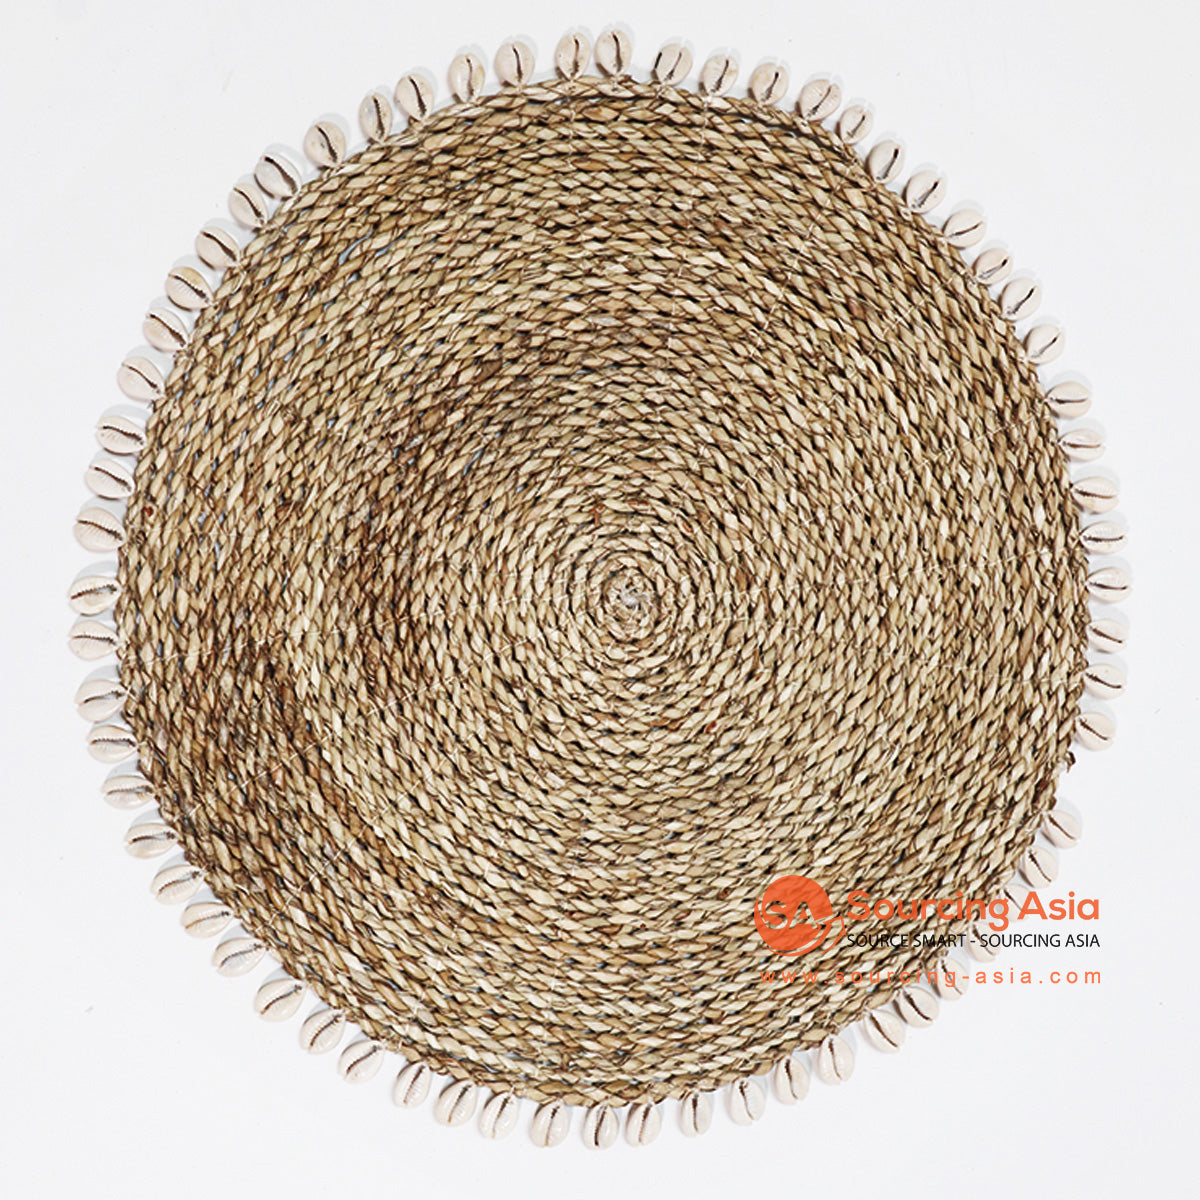 HBSC015-3 NATURAL SEA GRASS ROUND DECORATIVE PLACEMAT WITH SHELL